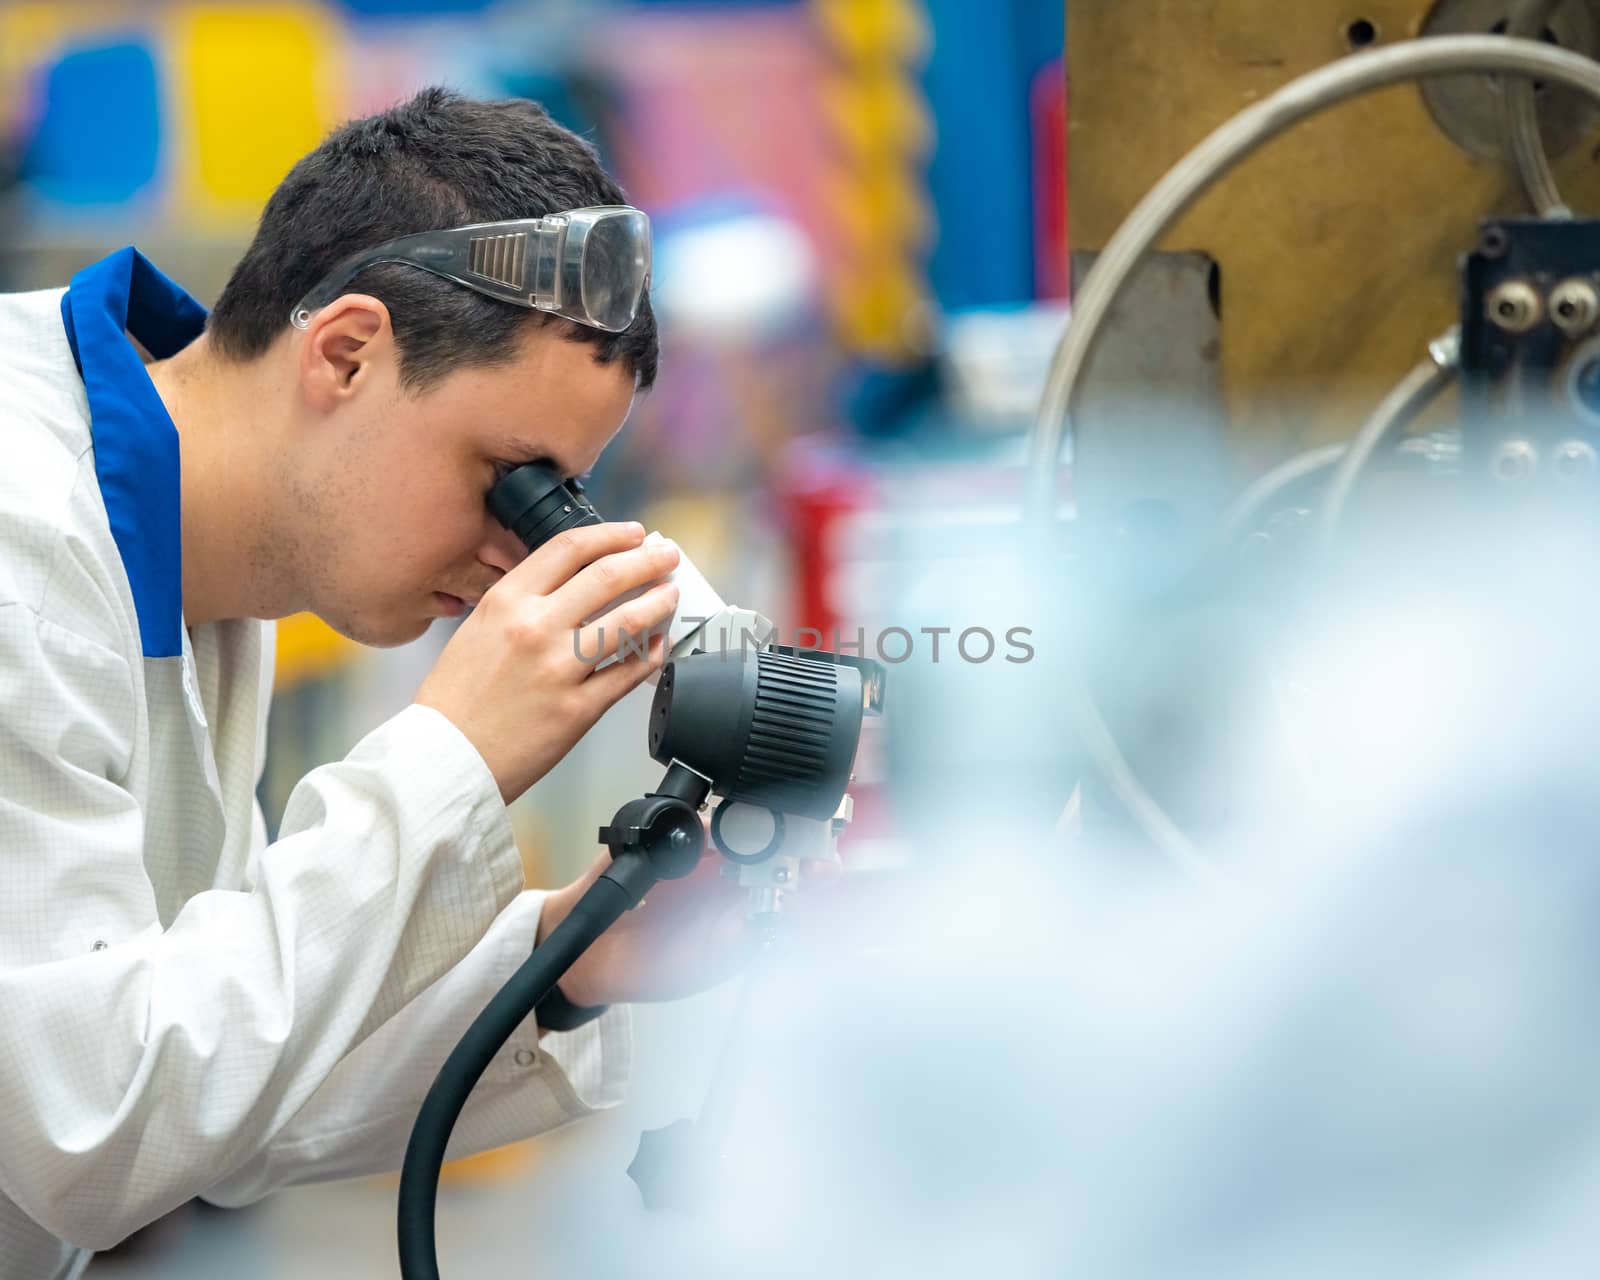 the engineer checks the correct setting of the metal mold for castings in the factory using a microscope.